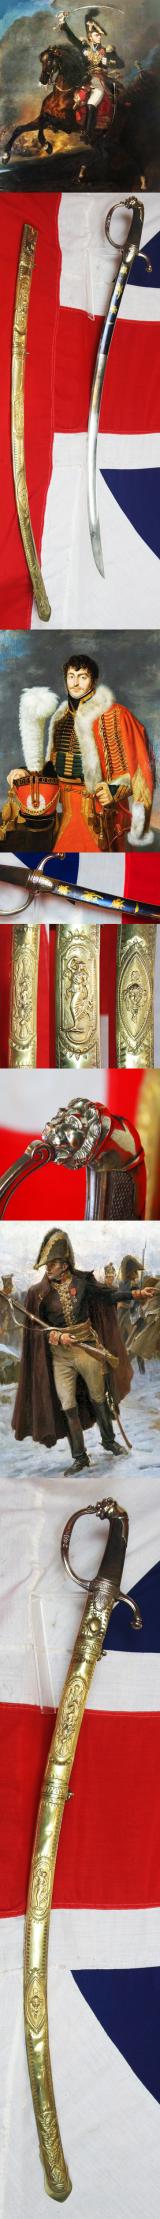 A Superb, Rare, Original, French Napoleonic Wars Deluxe Grade Sabre of a French General of Napoleon's General Staff, a Wonderful & Most Beautiful Sabre of Napoleon's Grand Armee. Consulate to Ist Empire Period